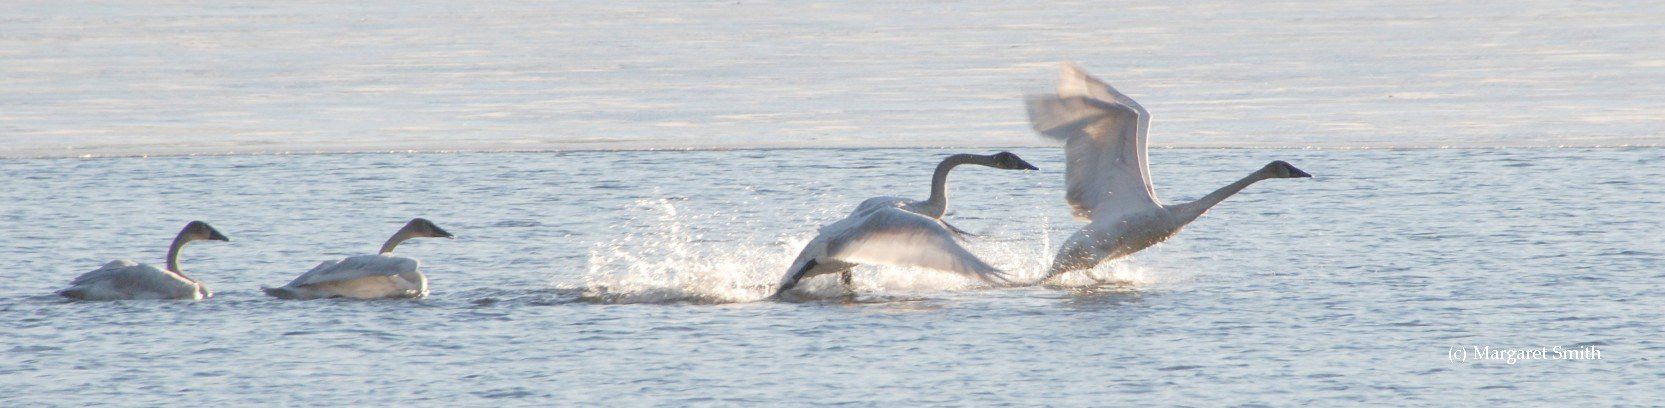 The Trumpeter Swan Society website is filled with information about Trumpeter Swans including Flight profiles.  Here you can see the progression of flight profiles as 4 Trumpeter Swans take off from water.